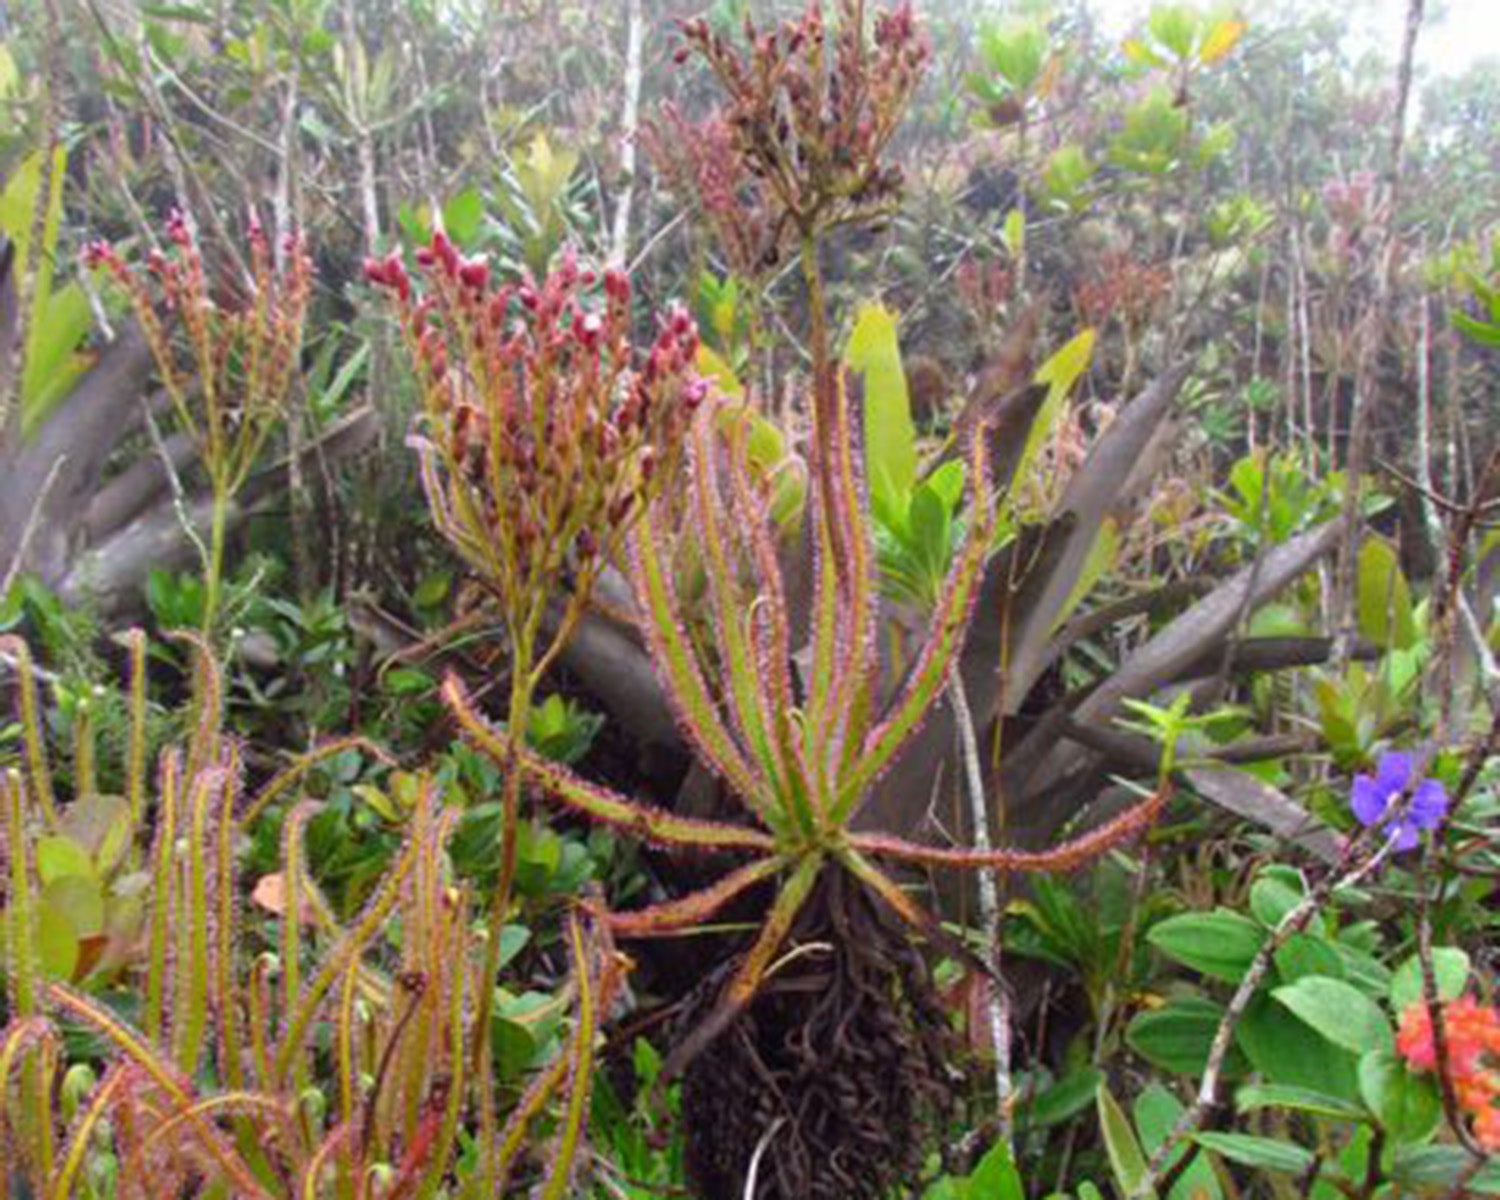 Some 2,000 new plant species are also discovered every year, such as this 1.5 metre tall fly-eating Brazilian sundew